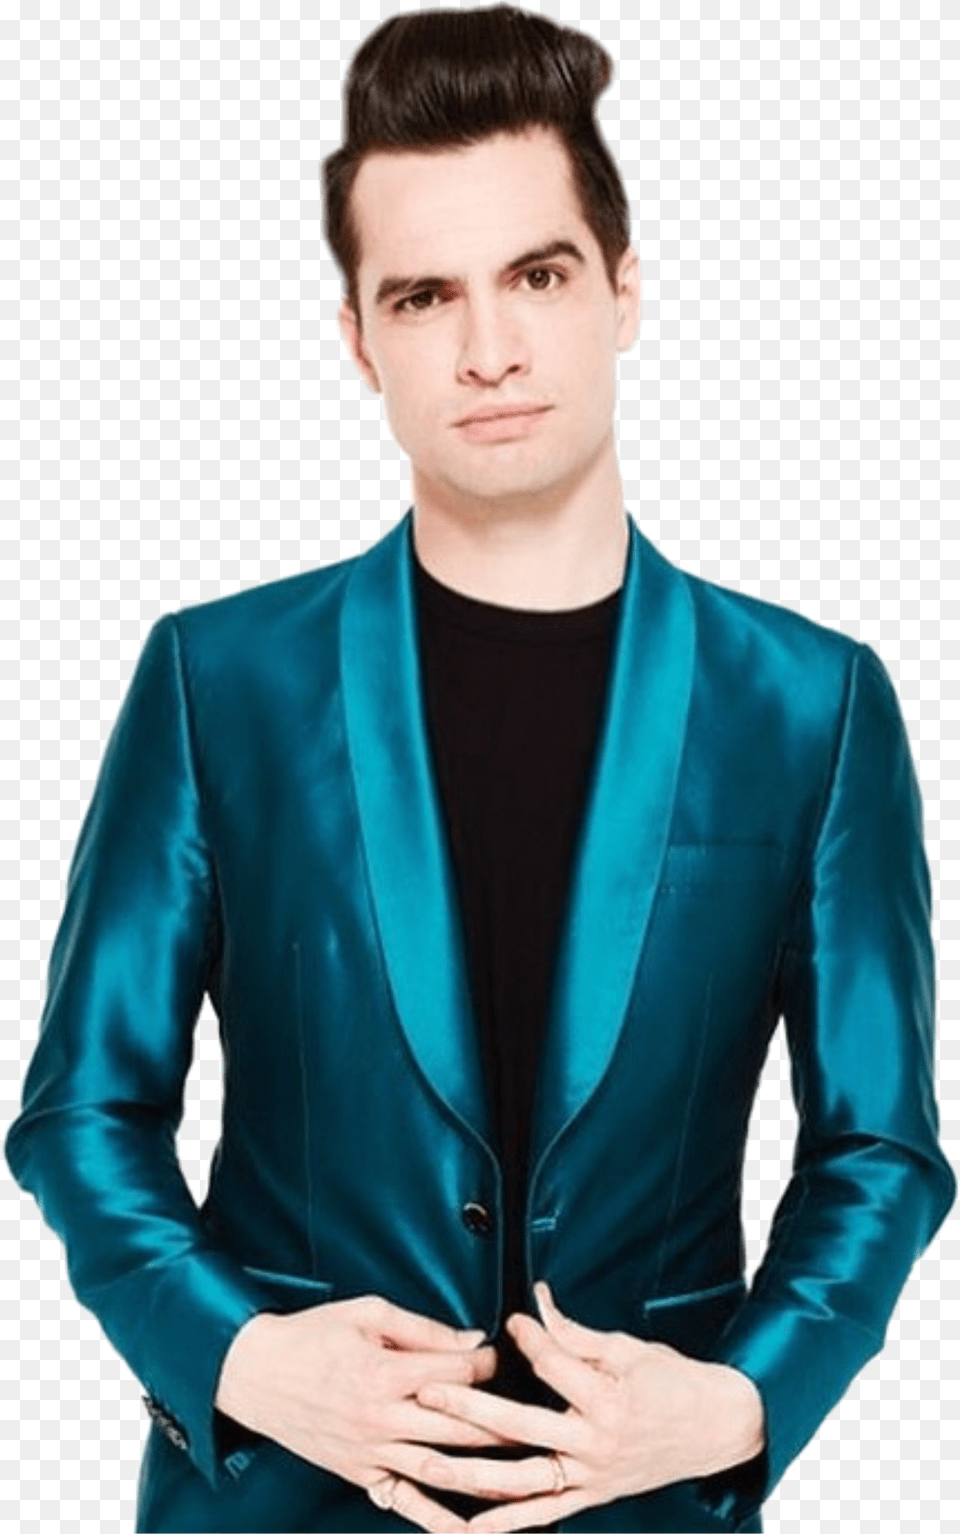 Brendon Urie I Know Not The Best Like Others But Its Brendon Urie Signed Poster Free Png